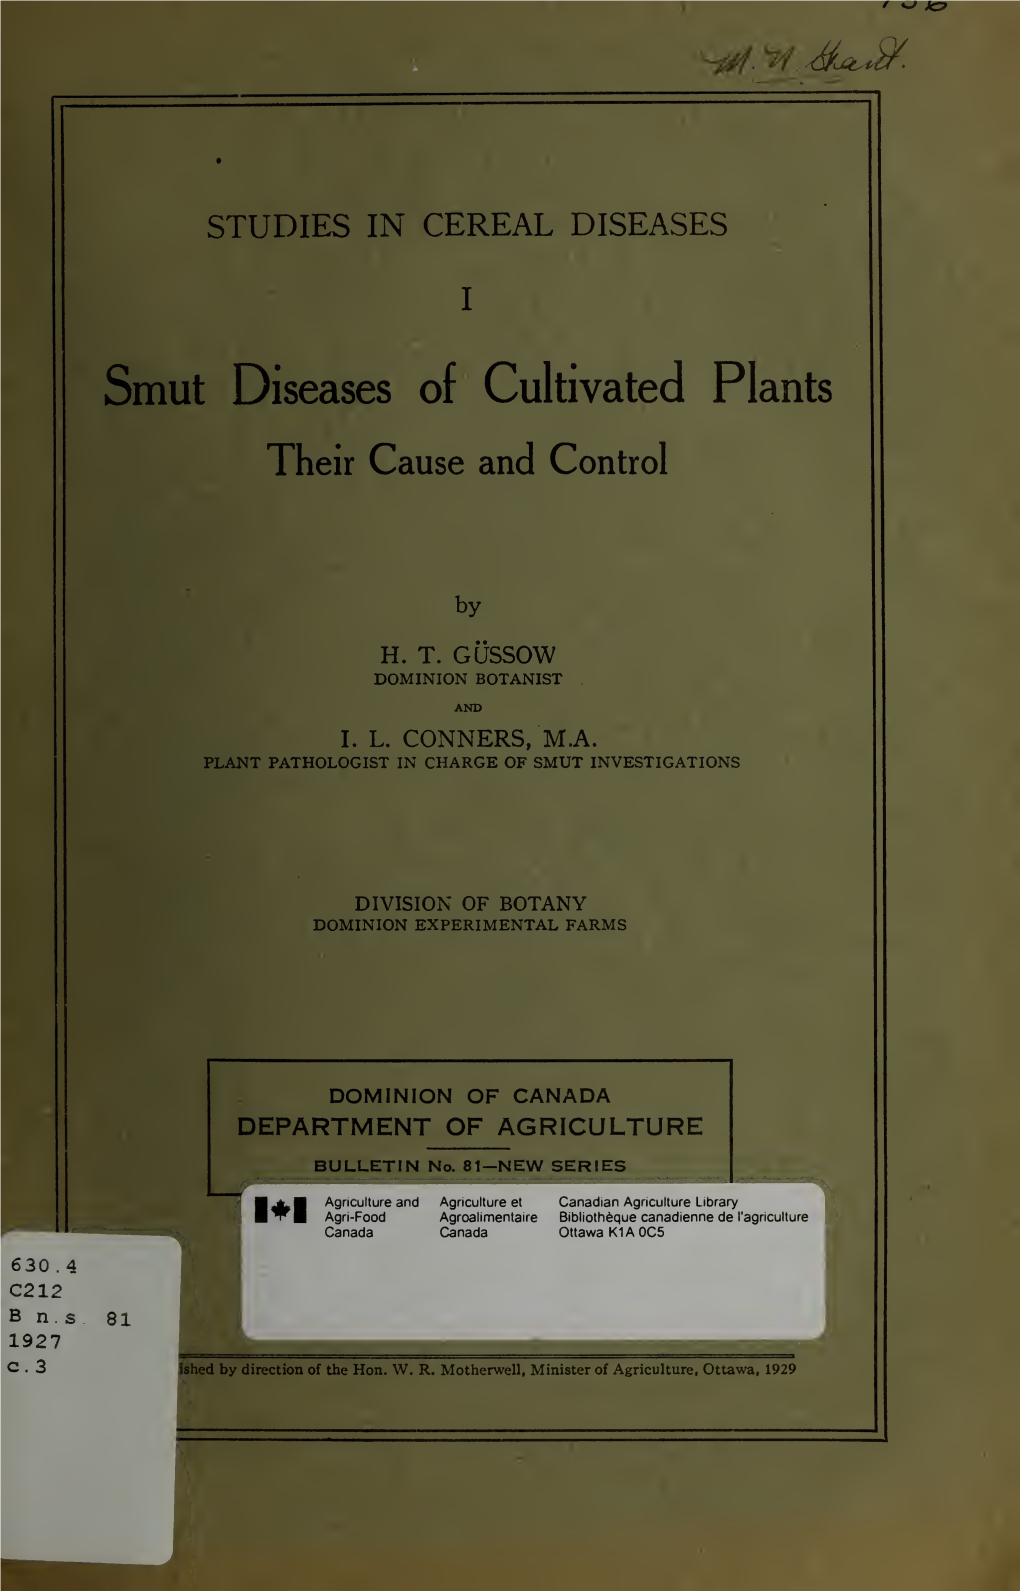 Smut Diseases of Cultivated Plants : Their Cause and Control